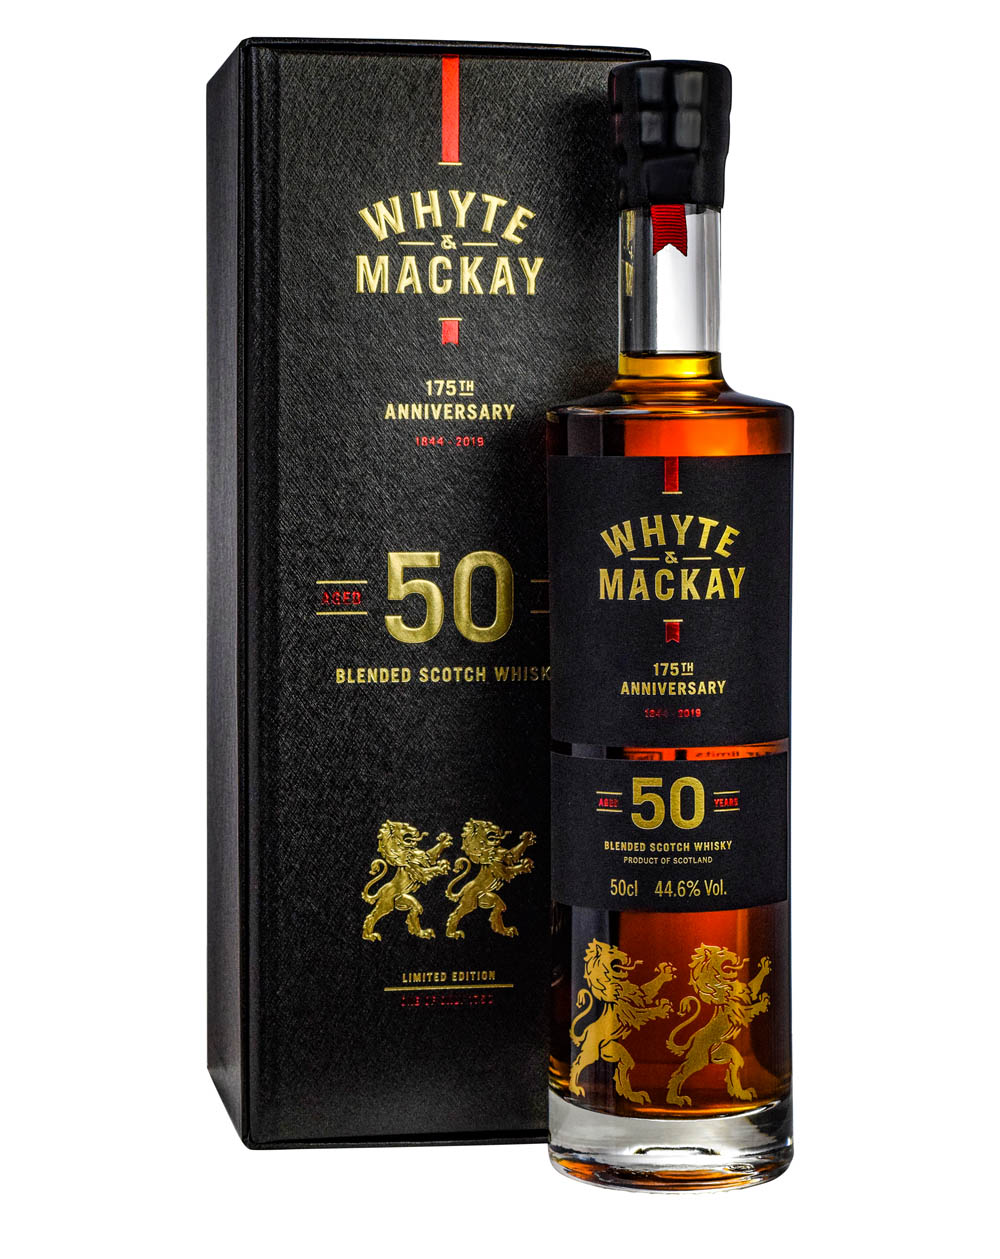 Whyte & Mackay 50 Years Old 175th Anniversary Blended Scotch Whisky Box